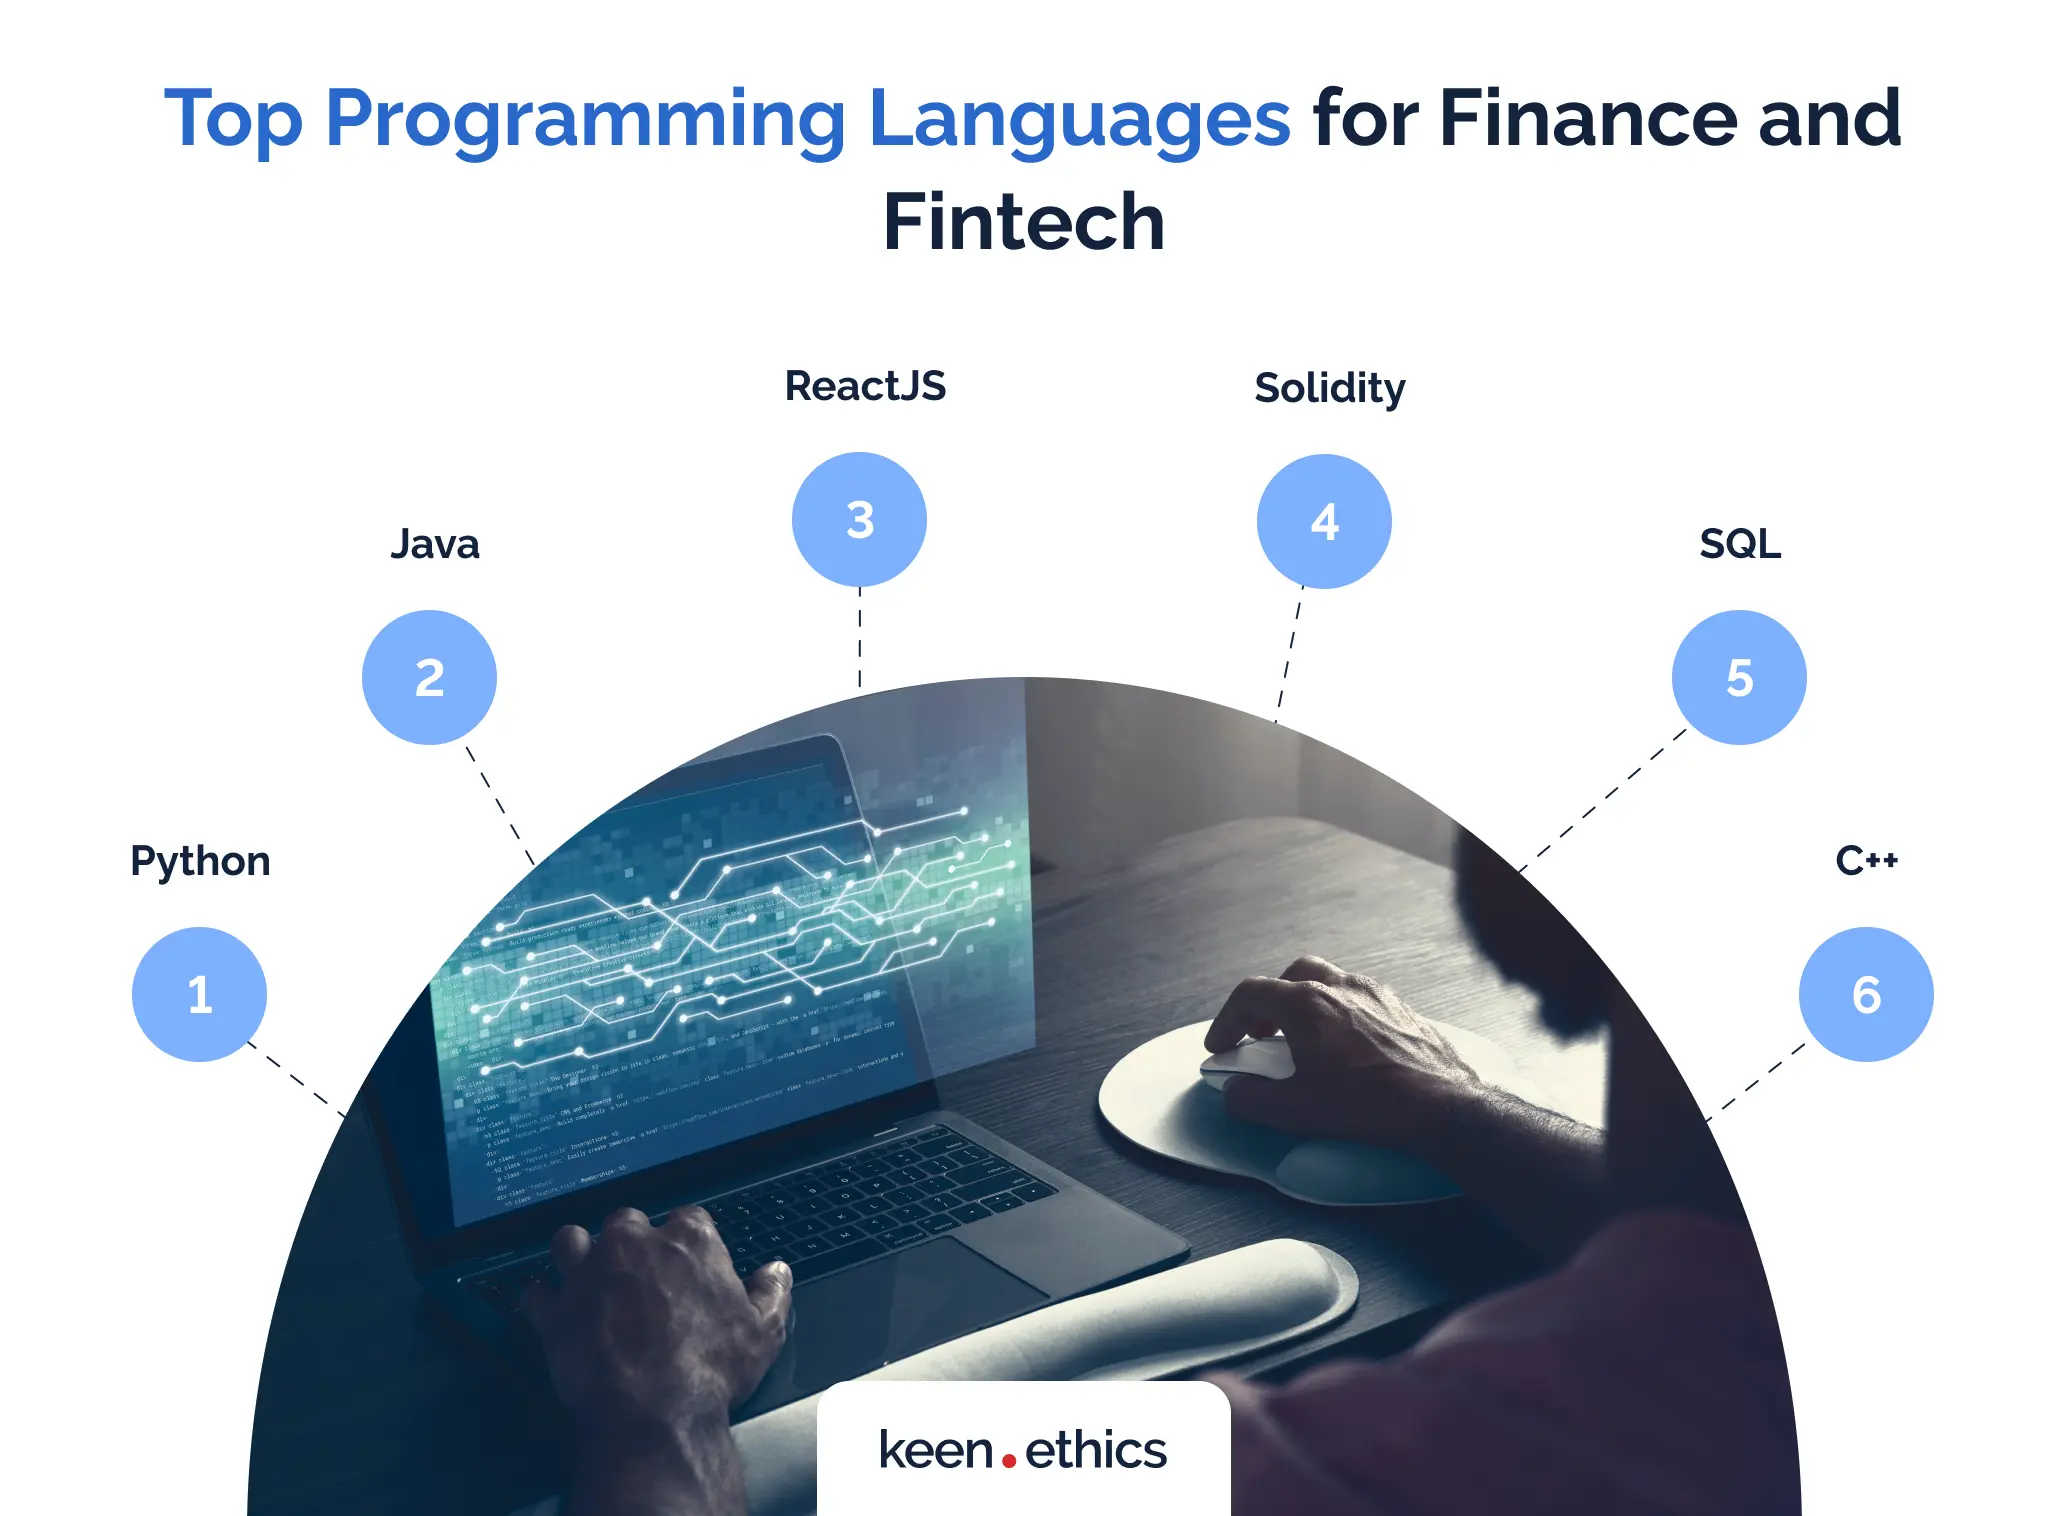 Top programming languages for finance and fintech